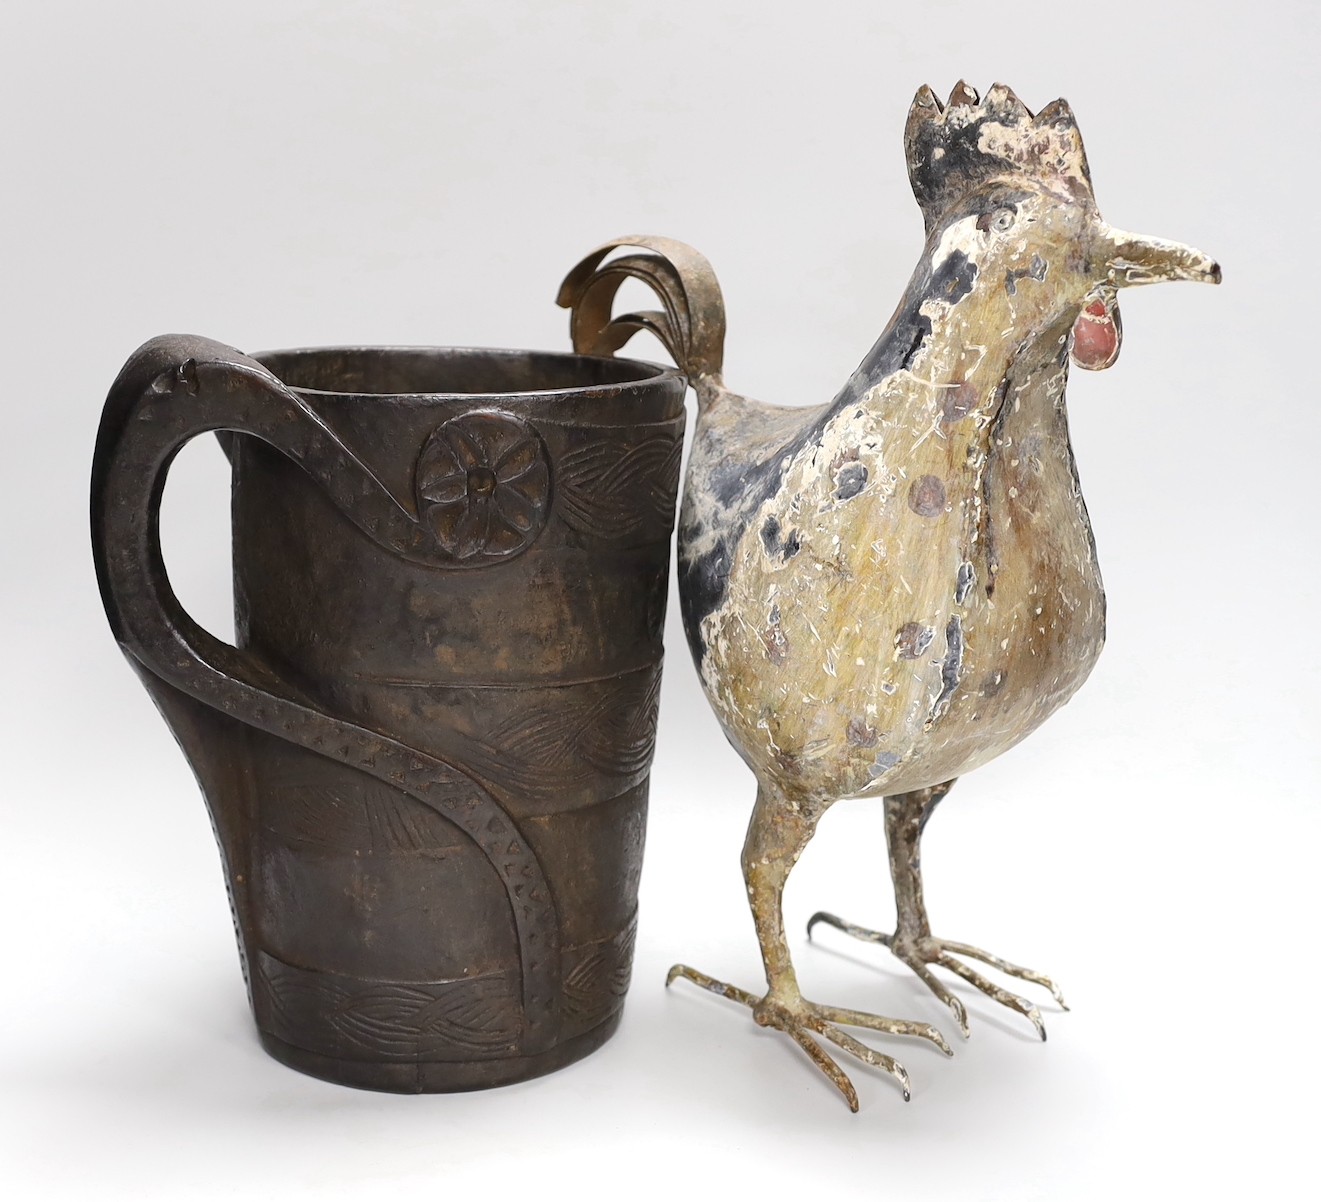 An 18th century Scandinavian carved wood tankard and a 19th century painted tin plated iron model of a cockerel, 36.5cm high.